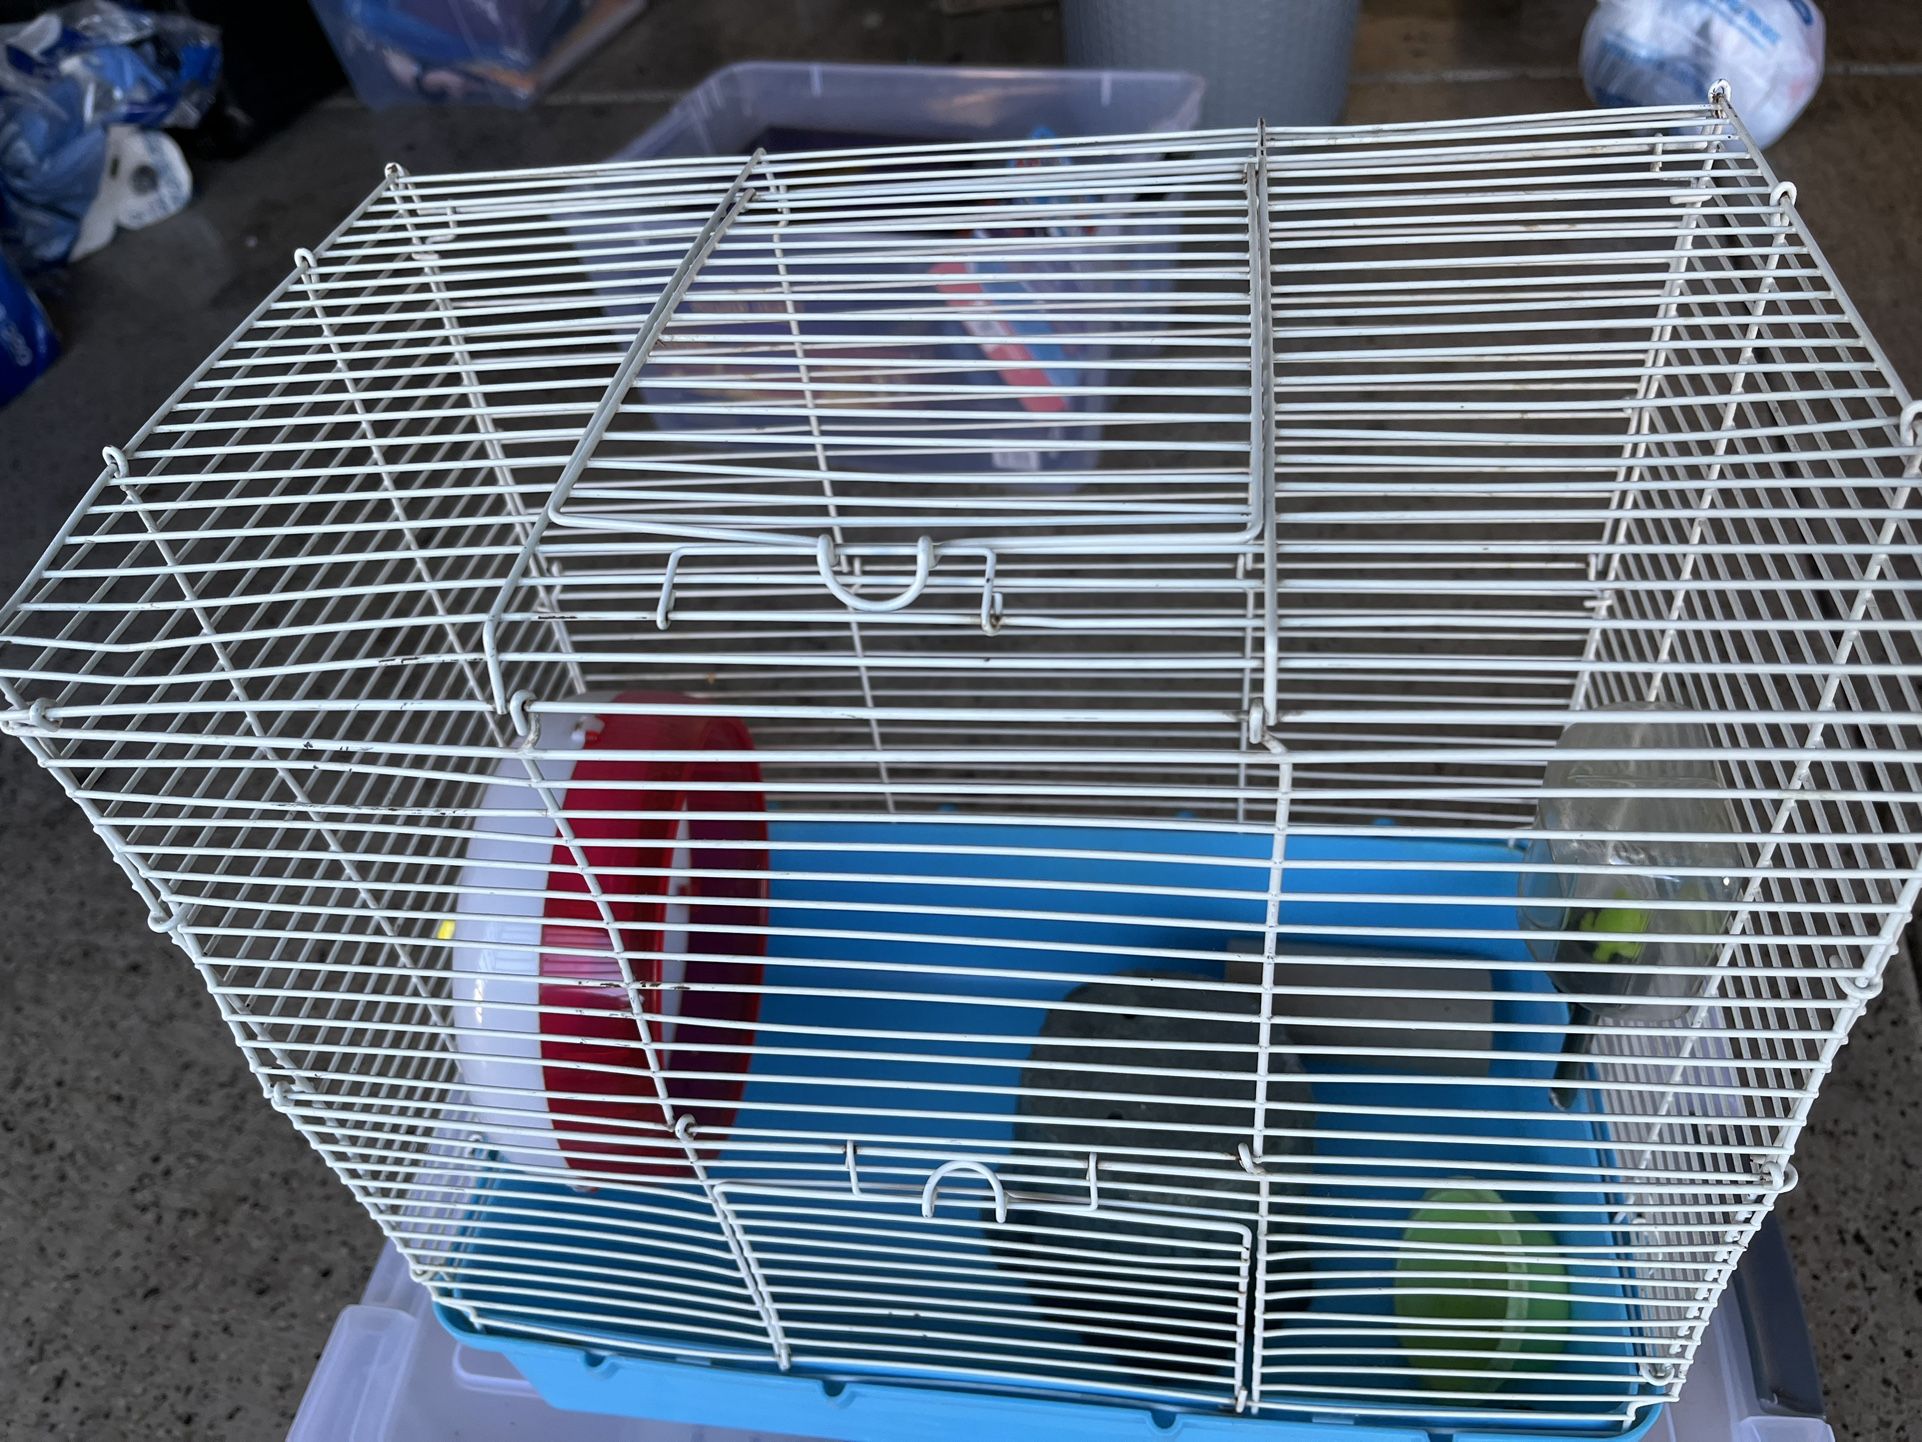 Hamster Gerbil Small Animal Cage 15 x 10 x 15 Inches With Running Wheel, Hut And Water Bottle